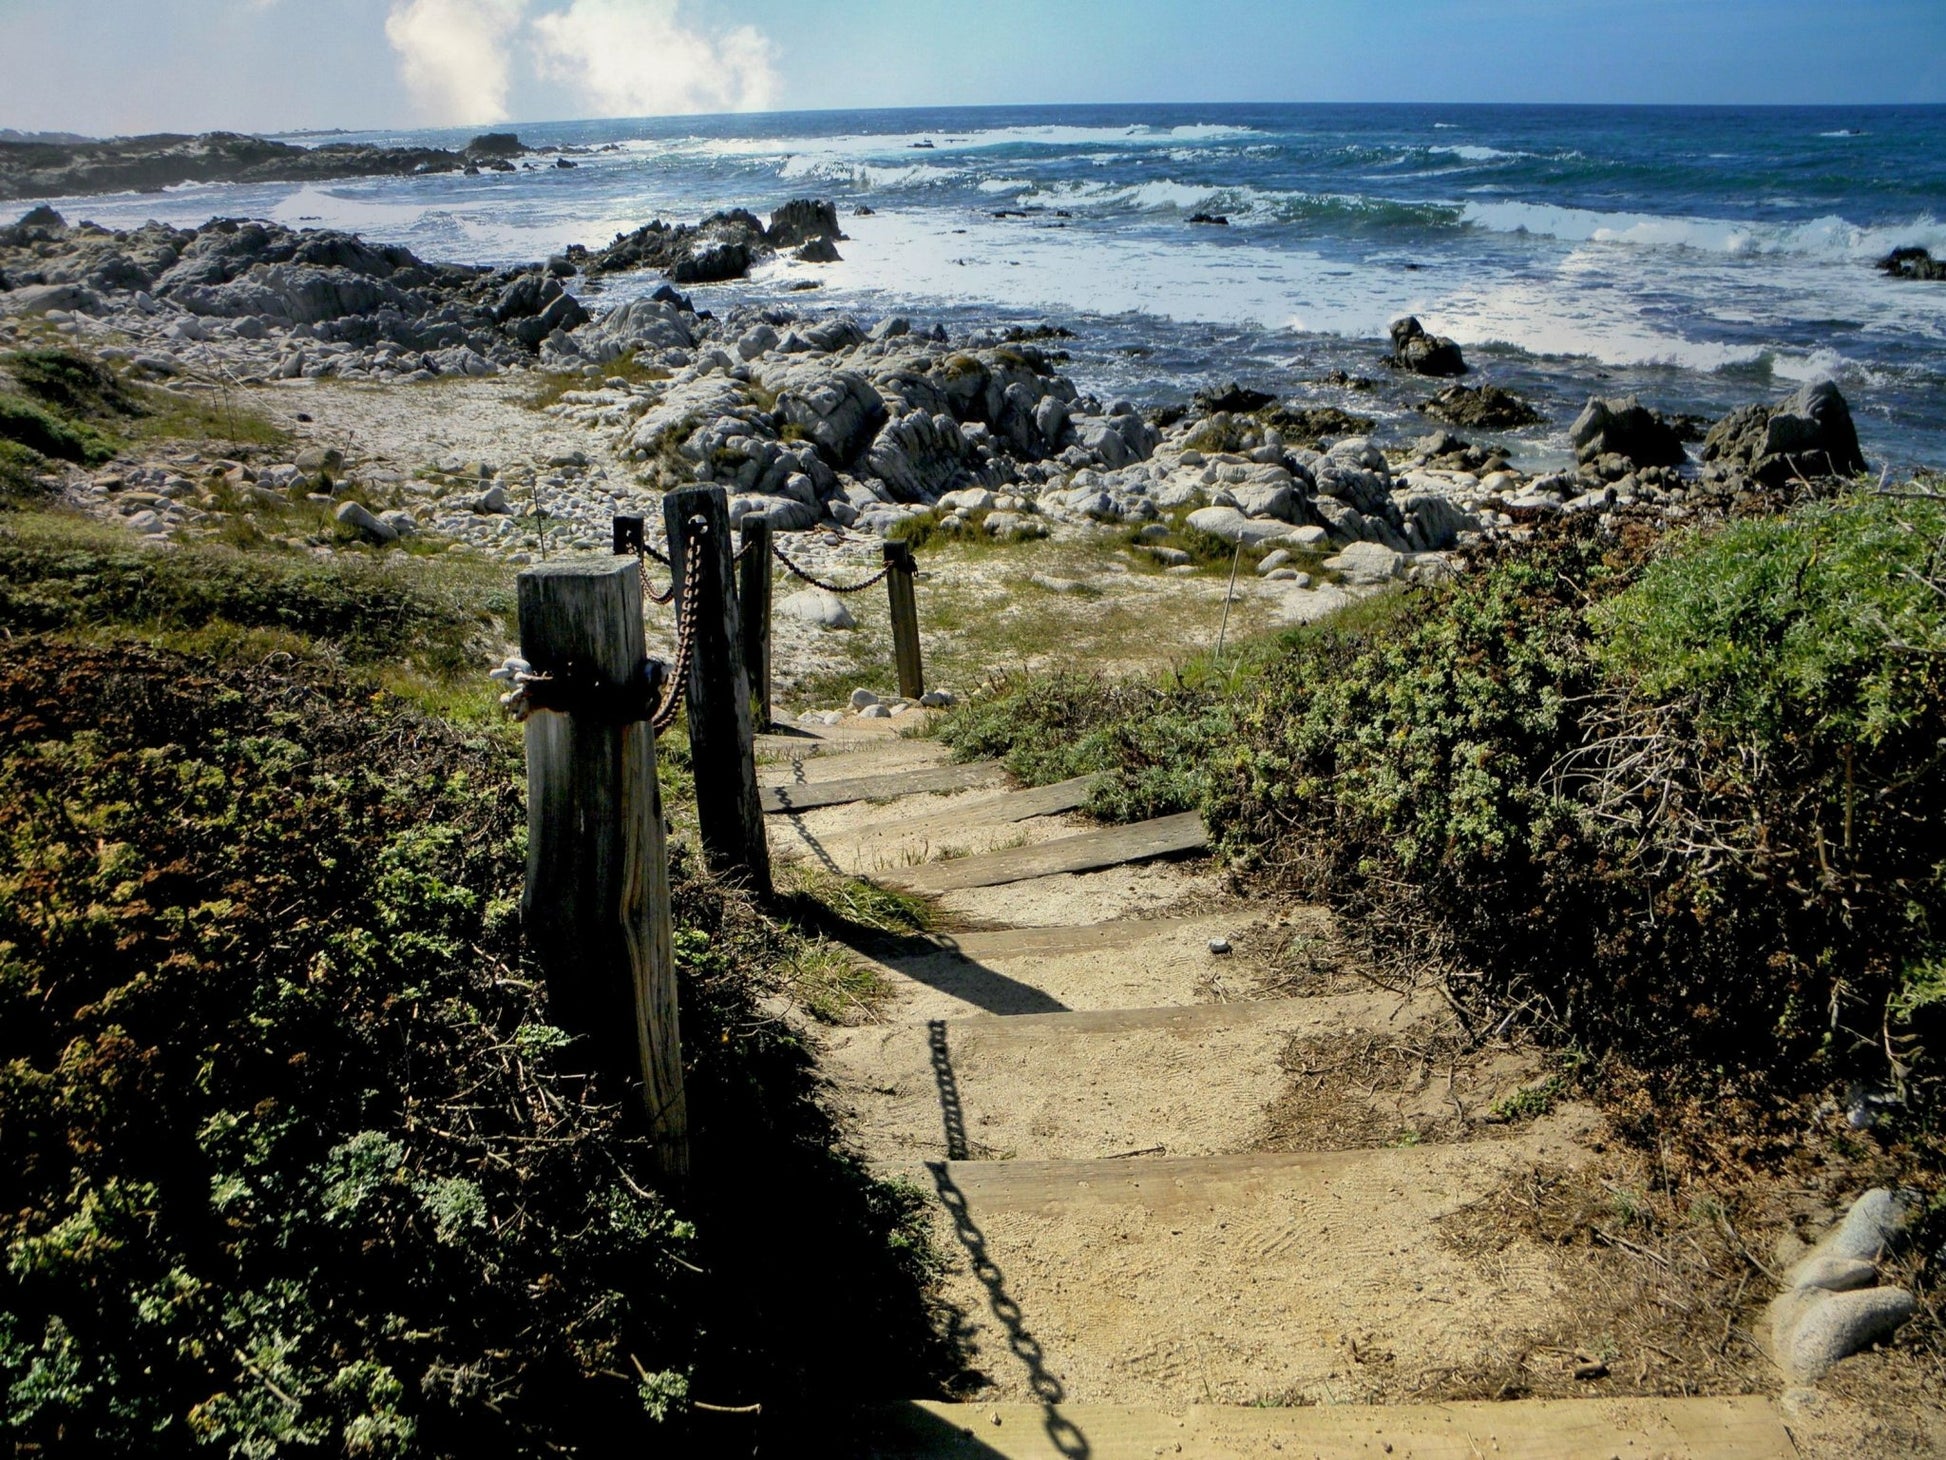 Photo of a stairway into a cove